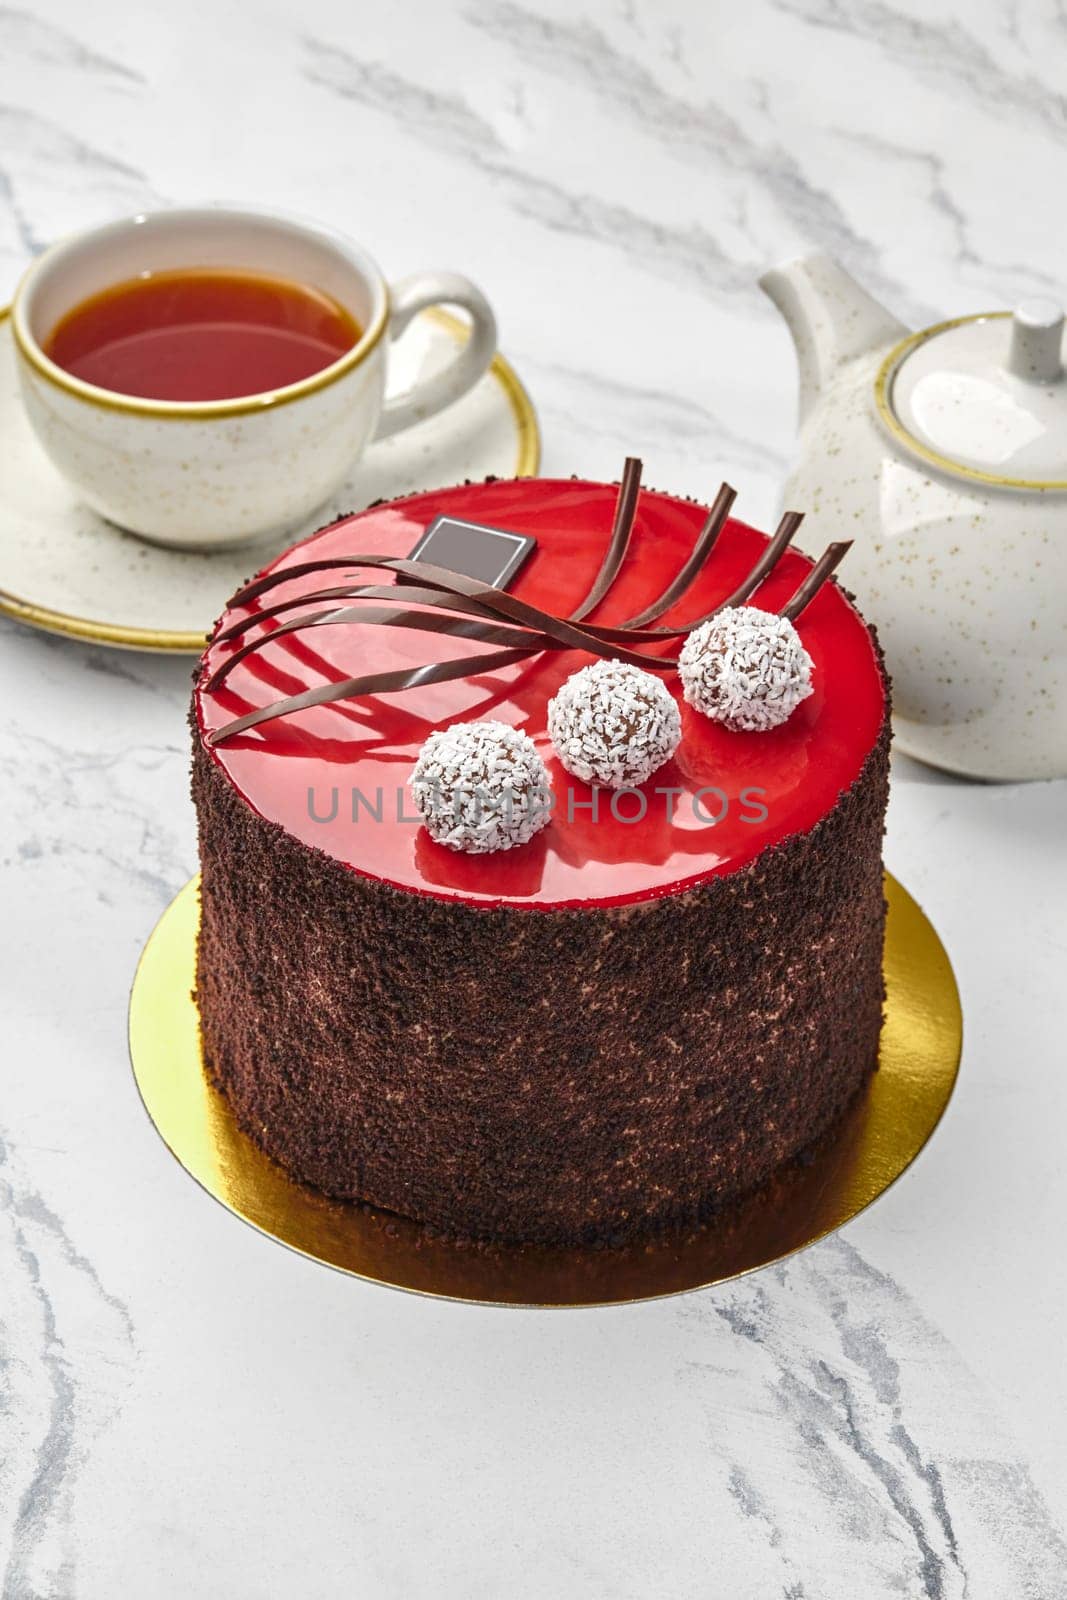 Inviting tea setting with striking red glazed chocolate cake decorated with coconut truffles, teacup, and teapot on marble background